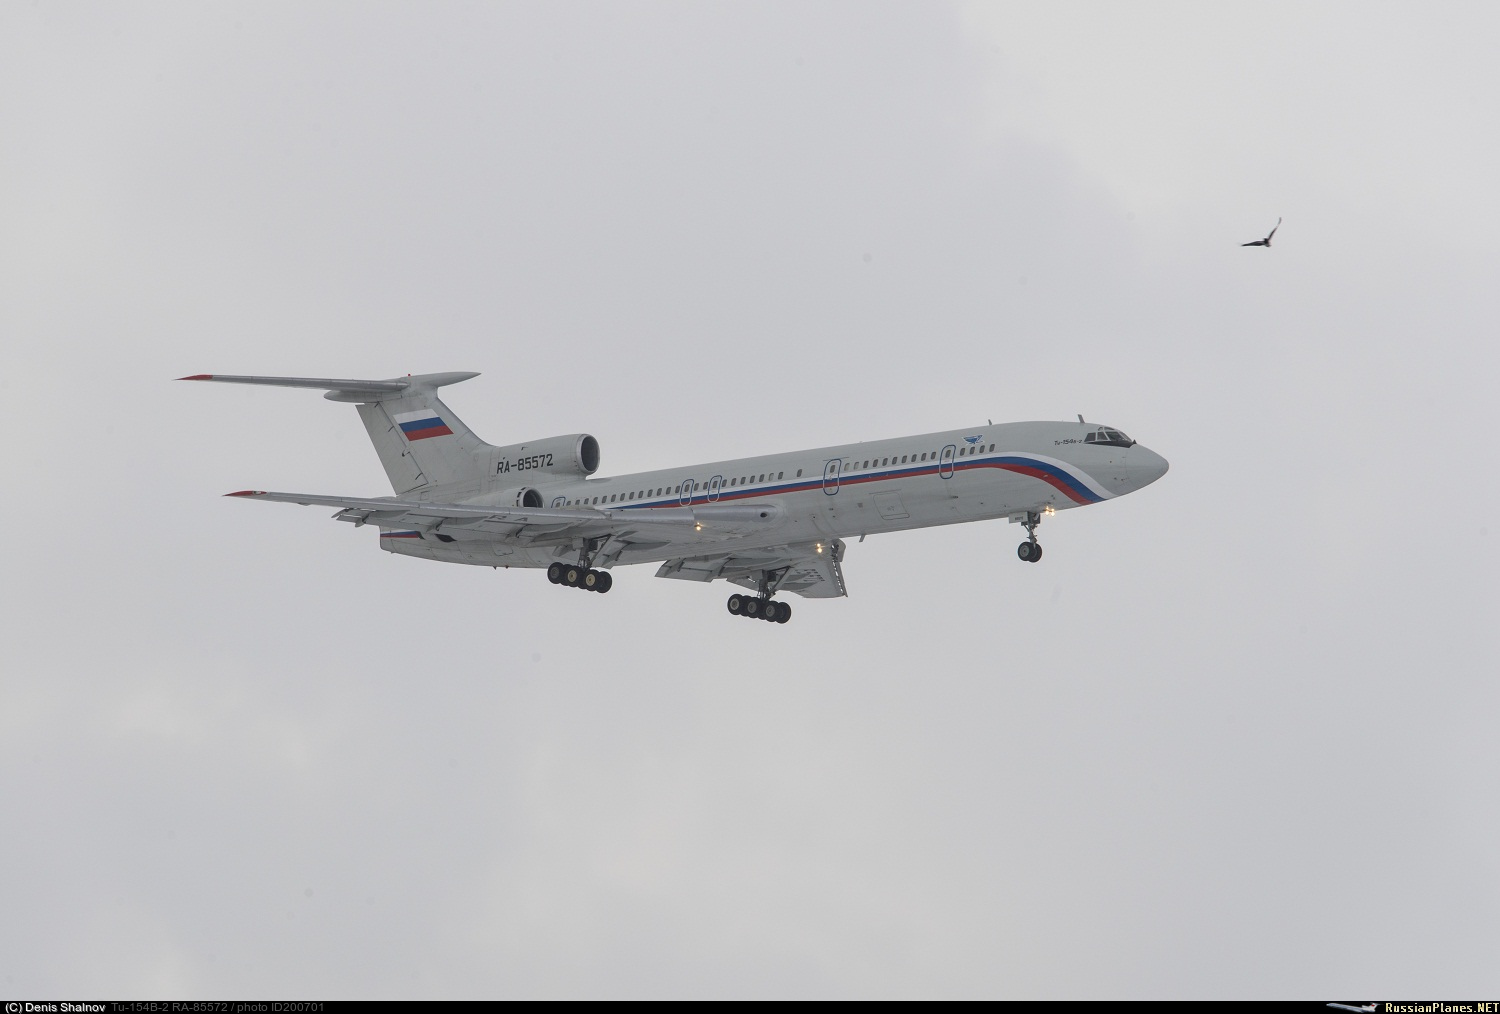 http://russianplanes.net/images/to201000/200701.jpg